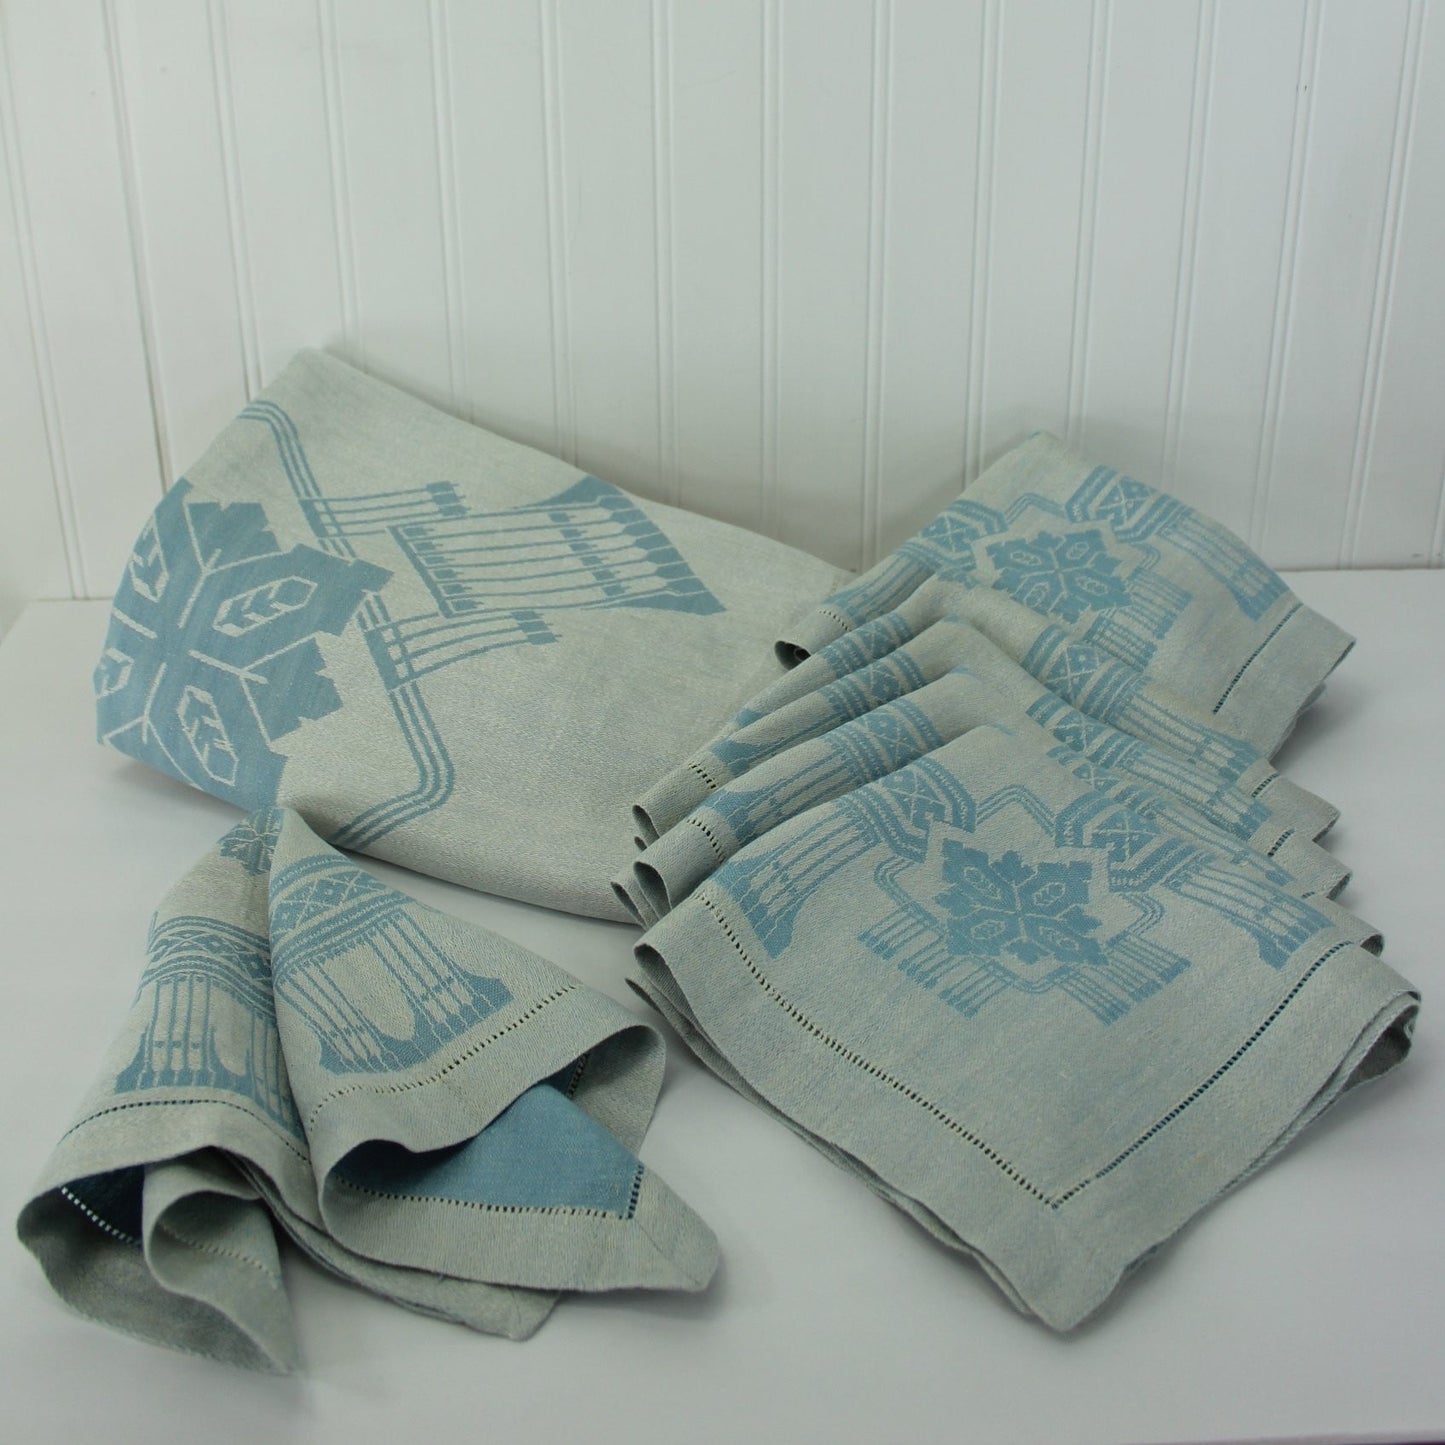 Blue Woven Tablecloth - 6 Matching Napkins - Fantastic Vintage Fabric